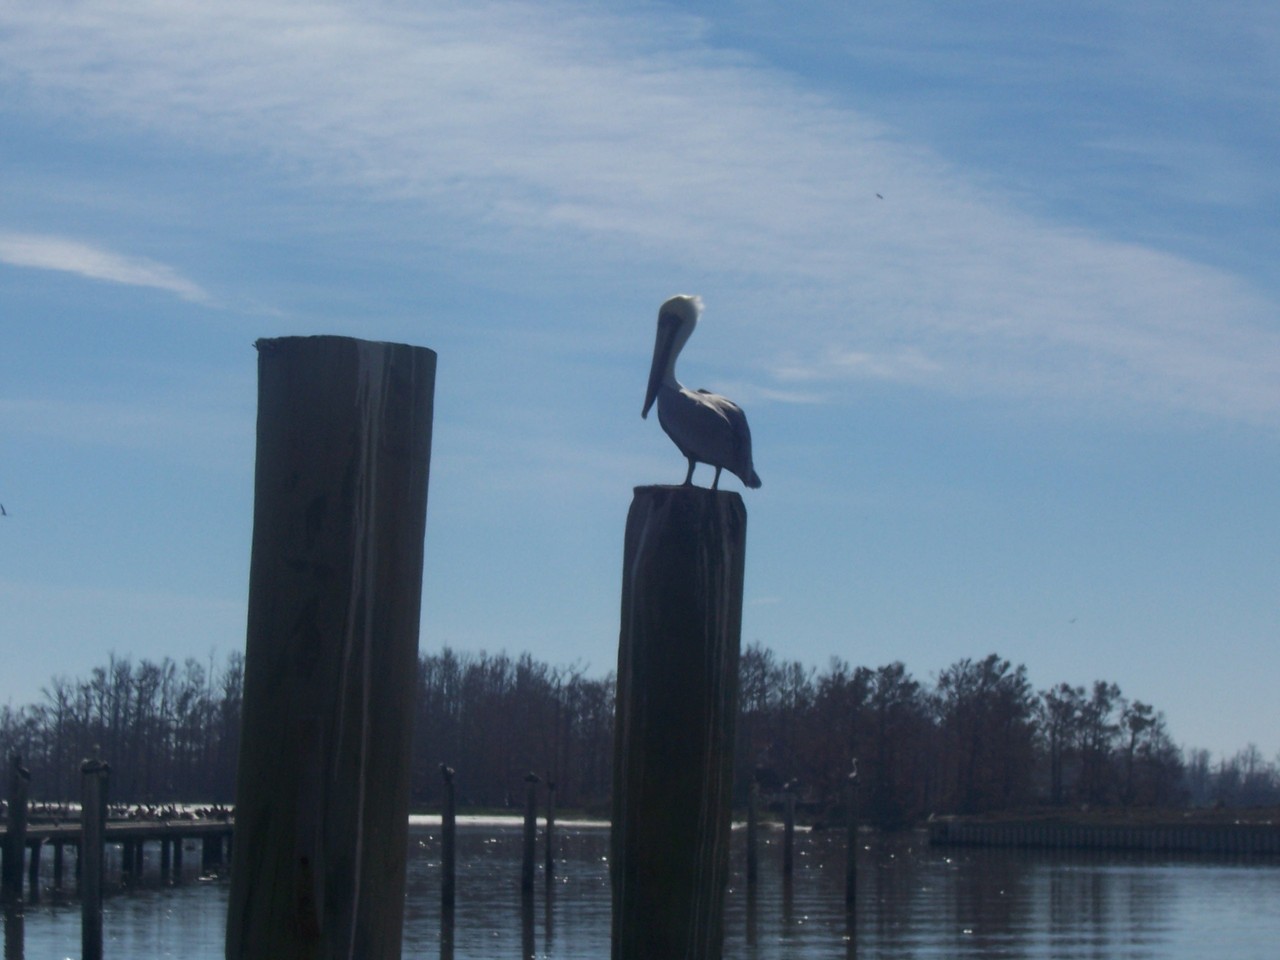 Boothville-Venice, LA: Taken from the dock of Cypress Cove Marina...Our state bird, a symbol that our HOME will RISE again!